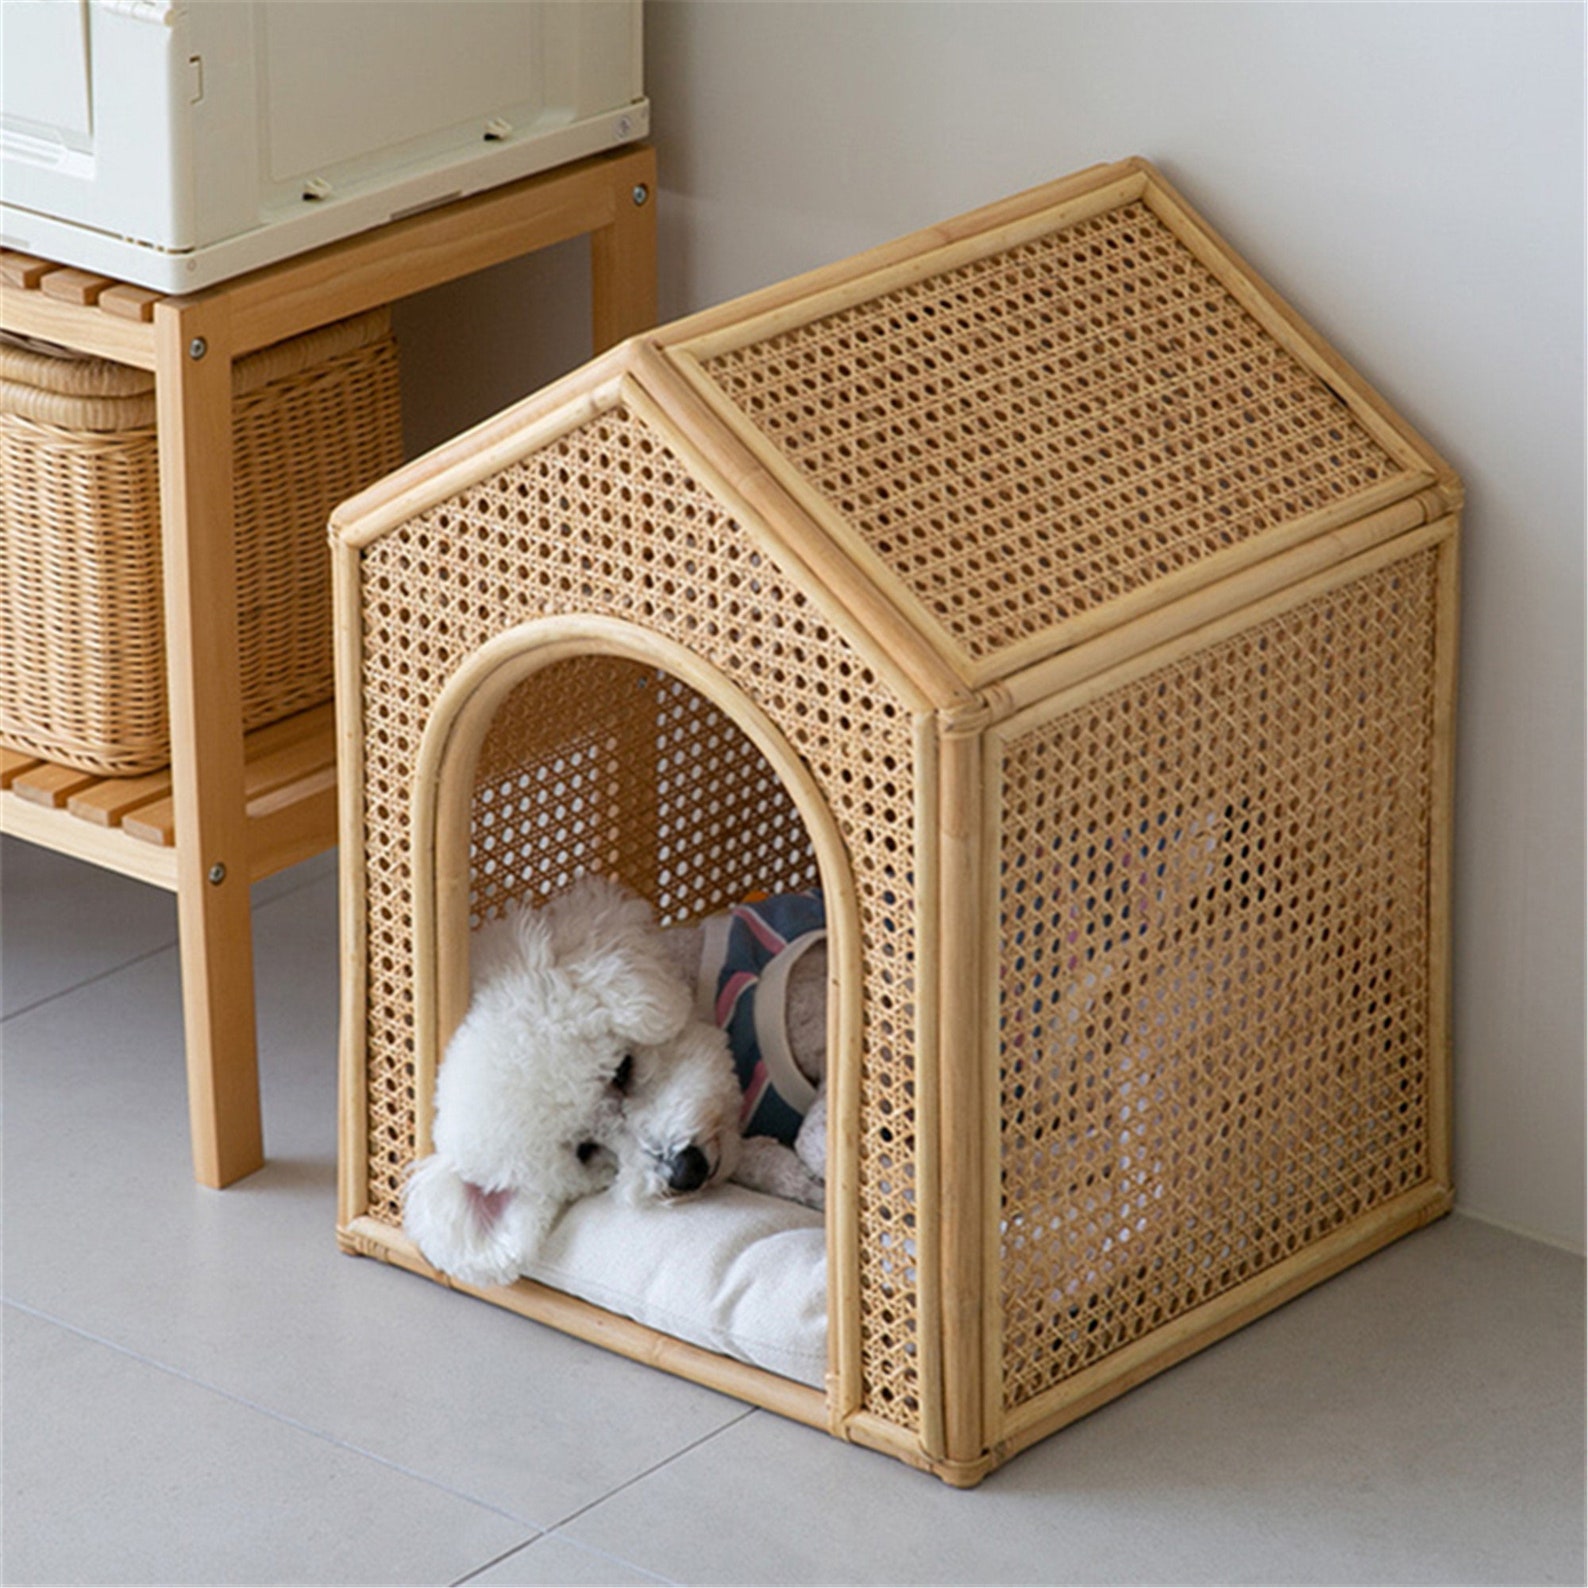 9 Cute Dog Bed Ideas You Need To See